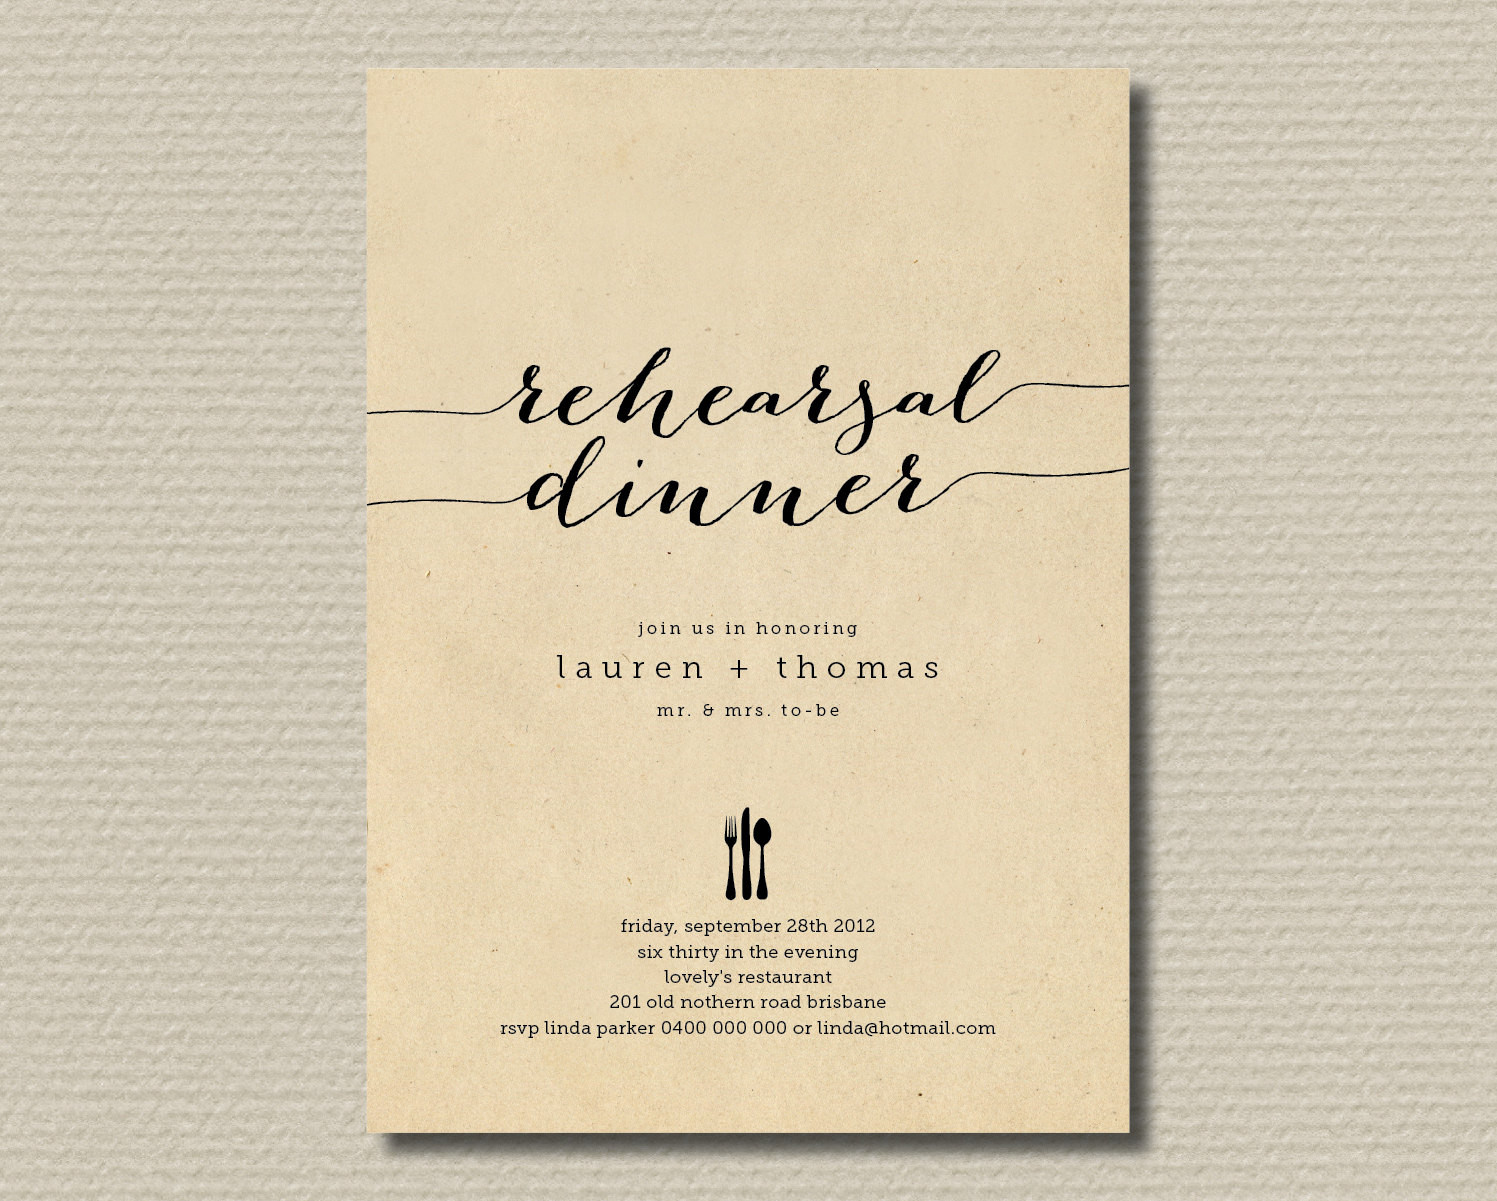 Who To Invite To Rehearsal Dinner
 10 Affordable Places to Find Rehearsal Dinner Invitations